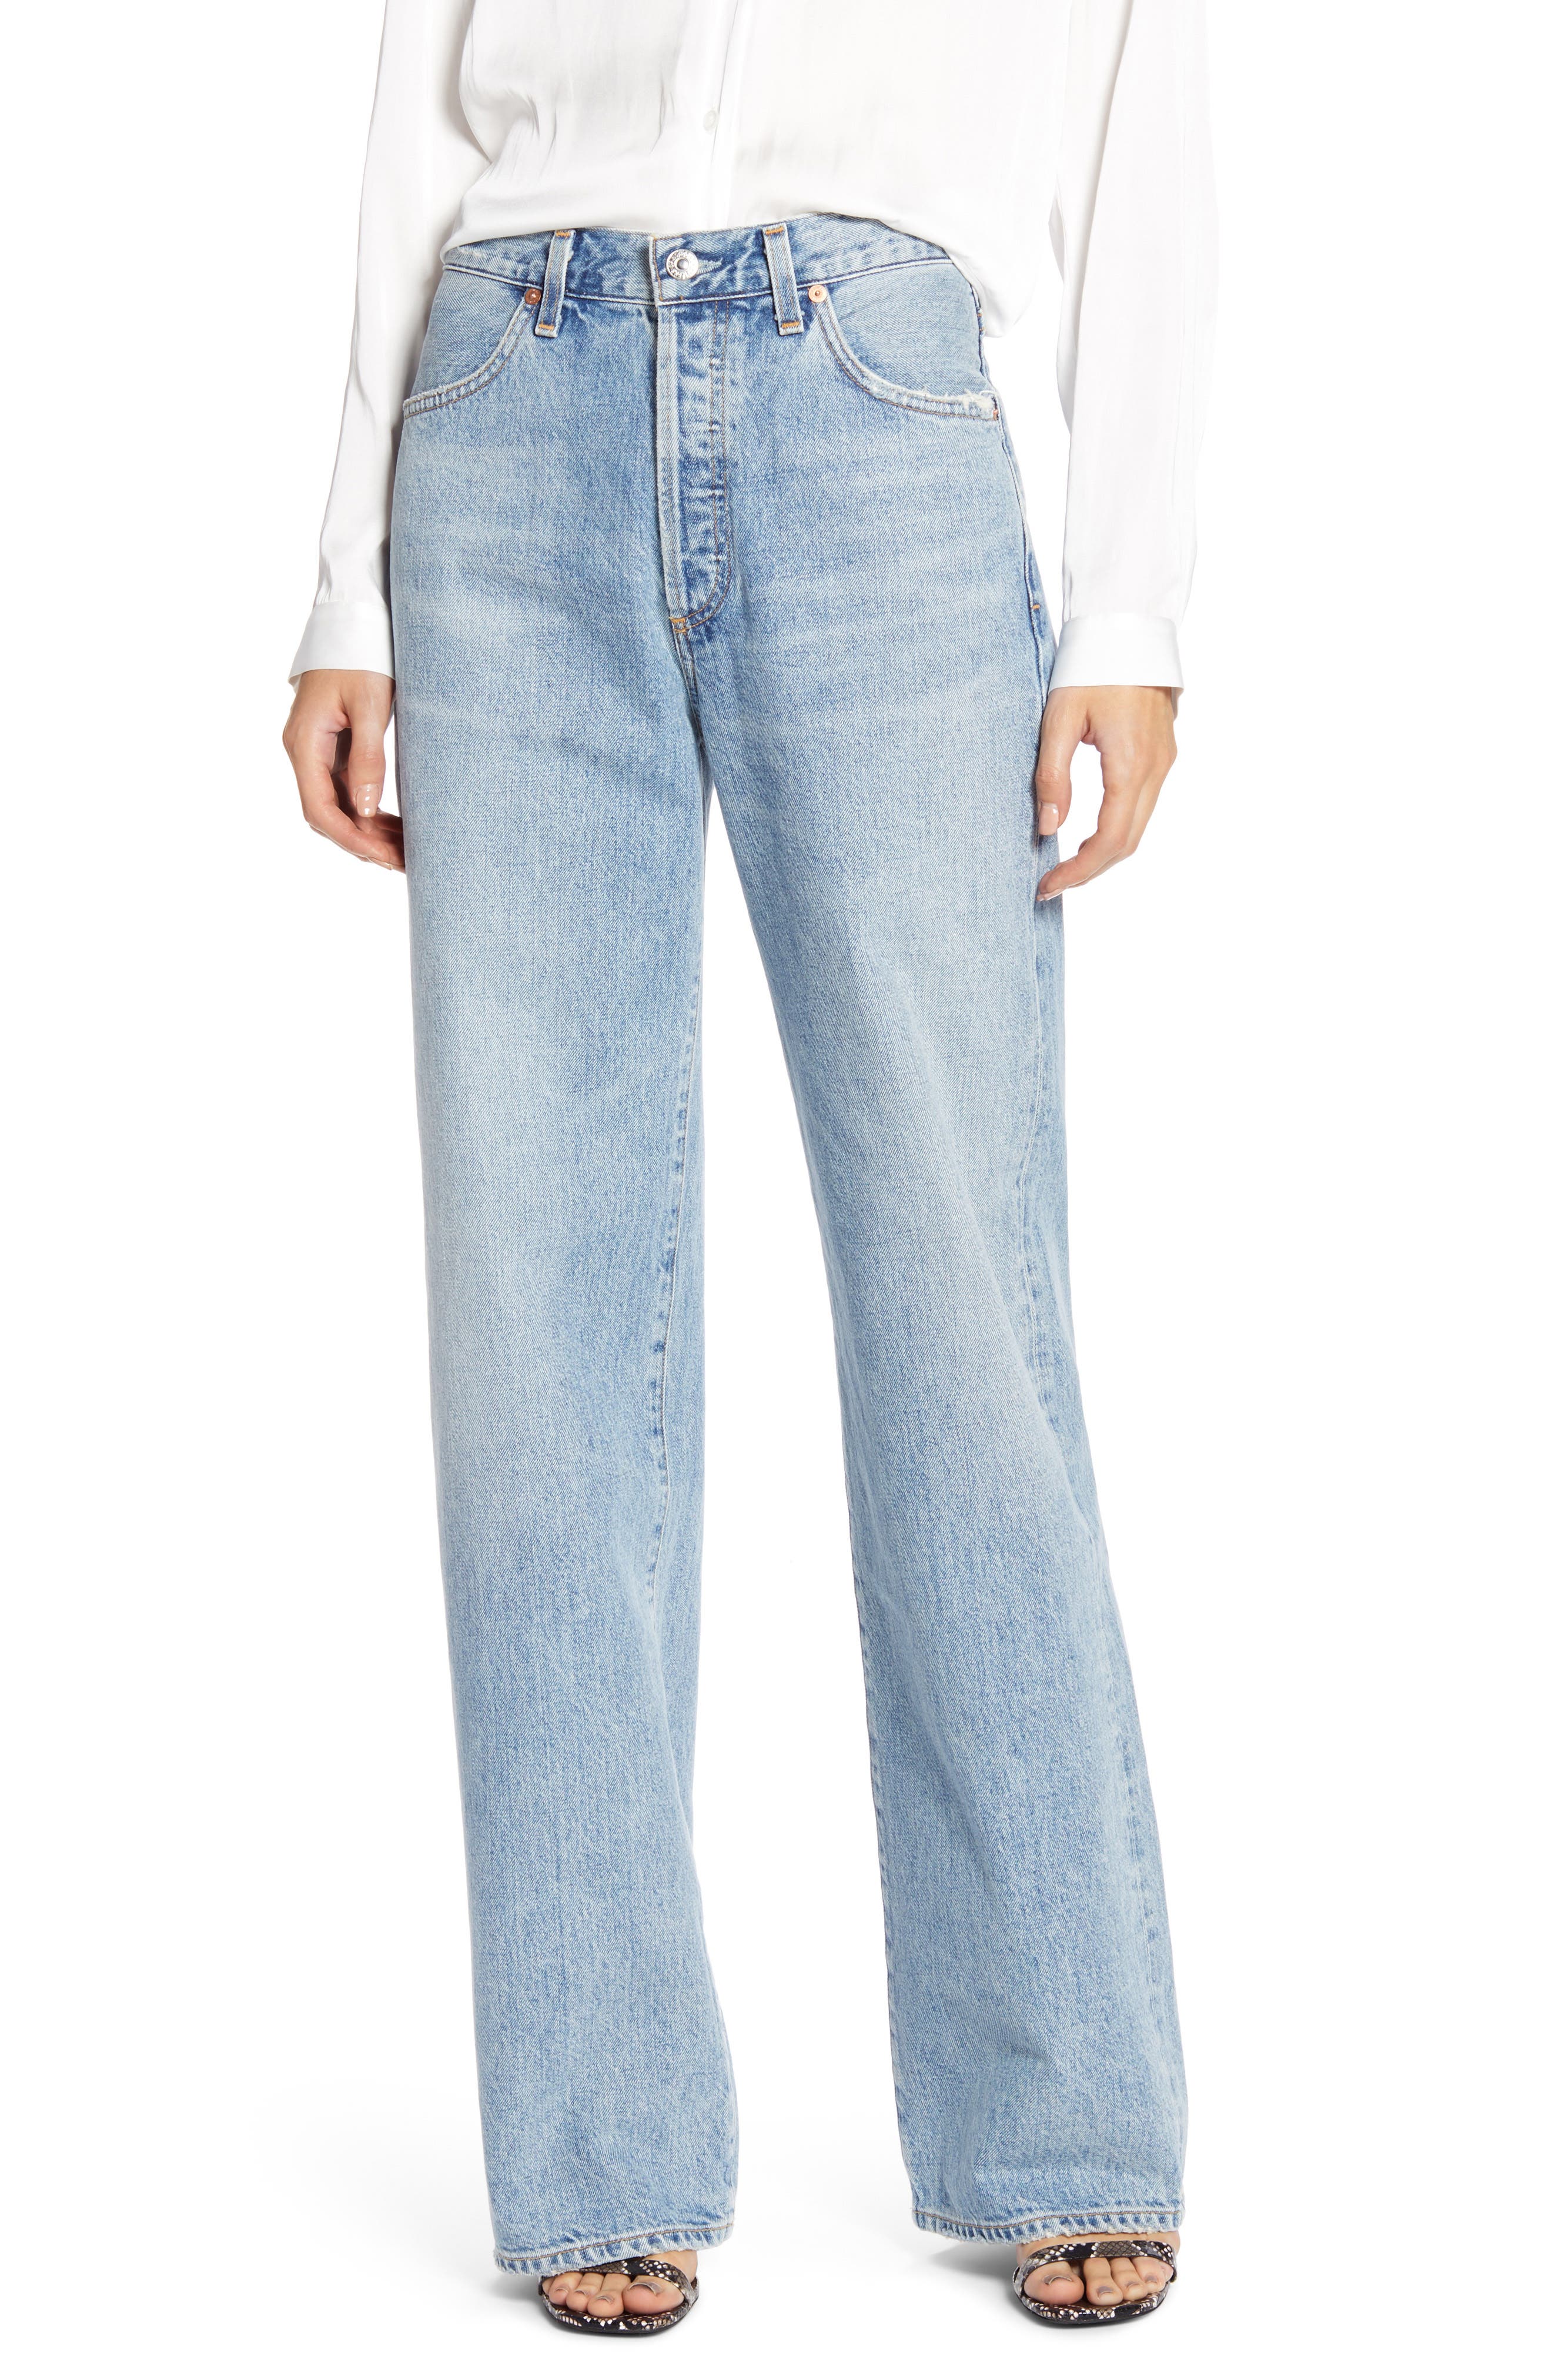 citizens of humanity trouser jeans